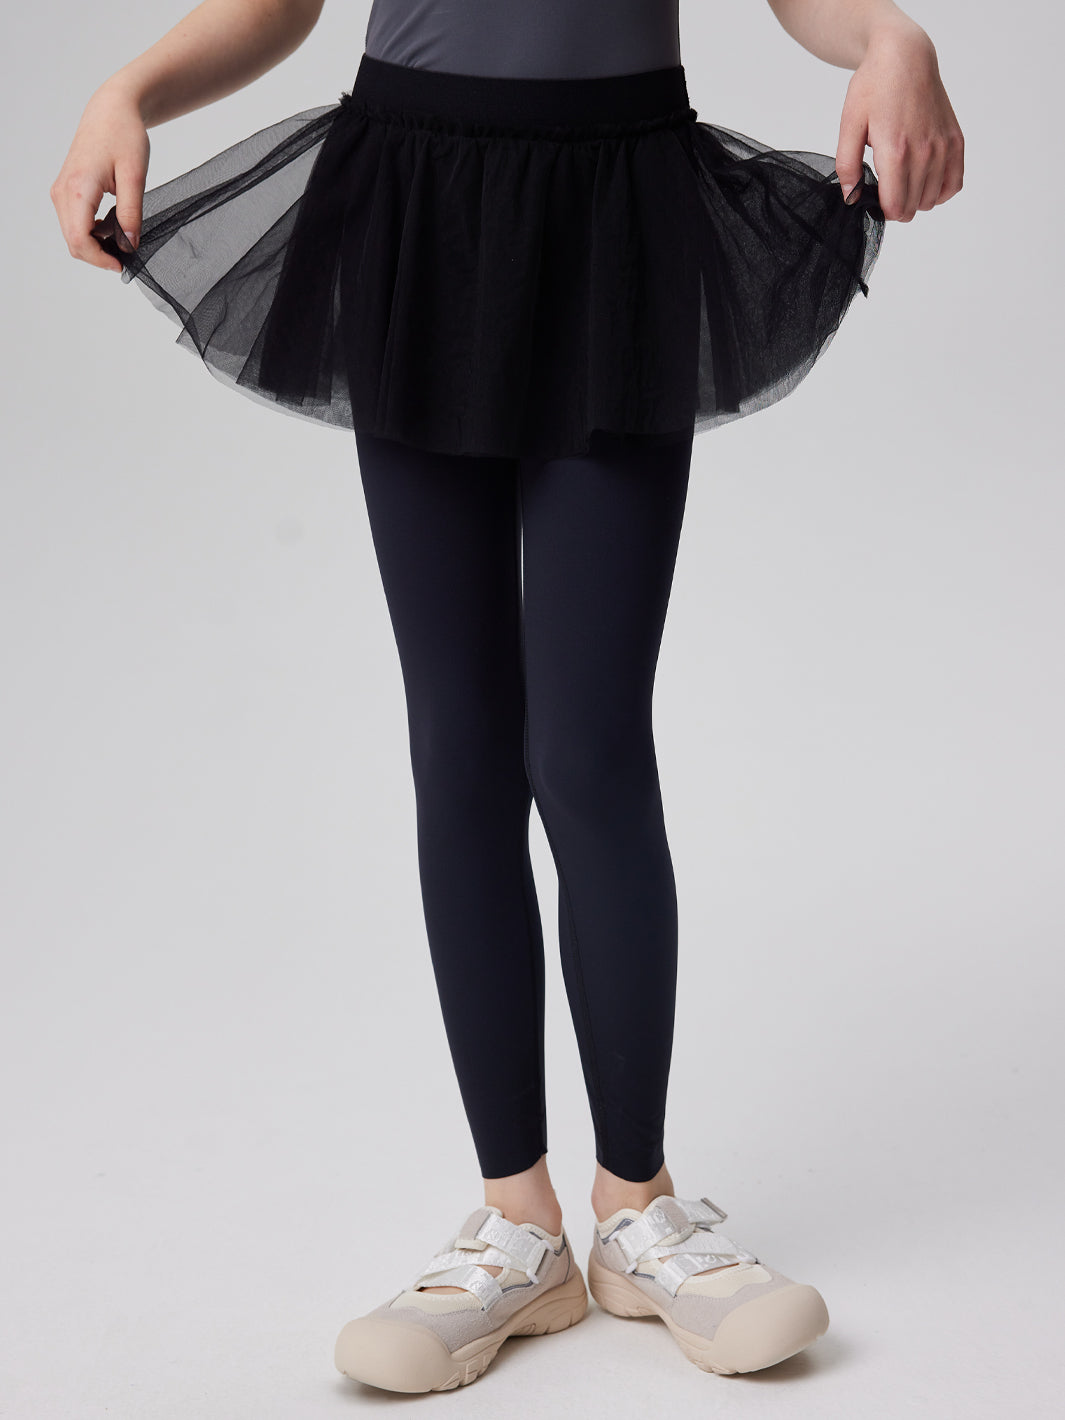 3-layers Lace Pleated Skirted Leggings